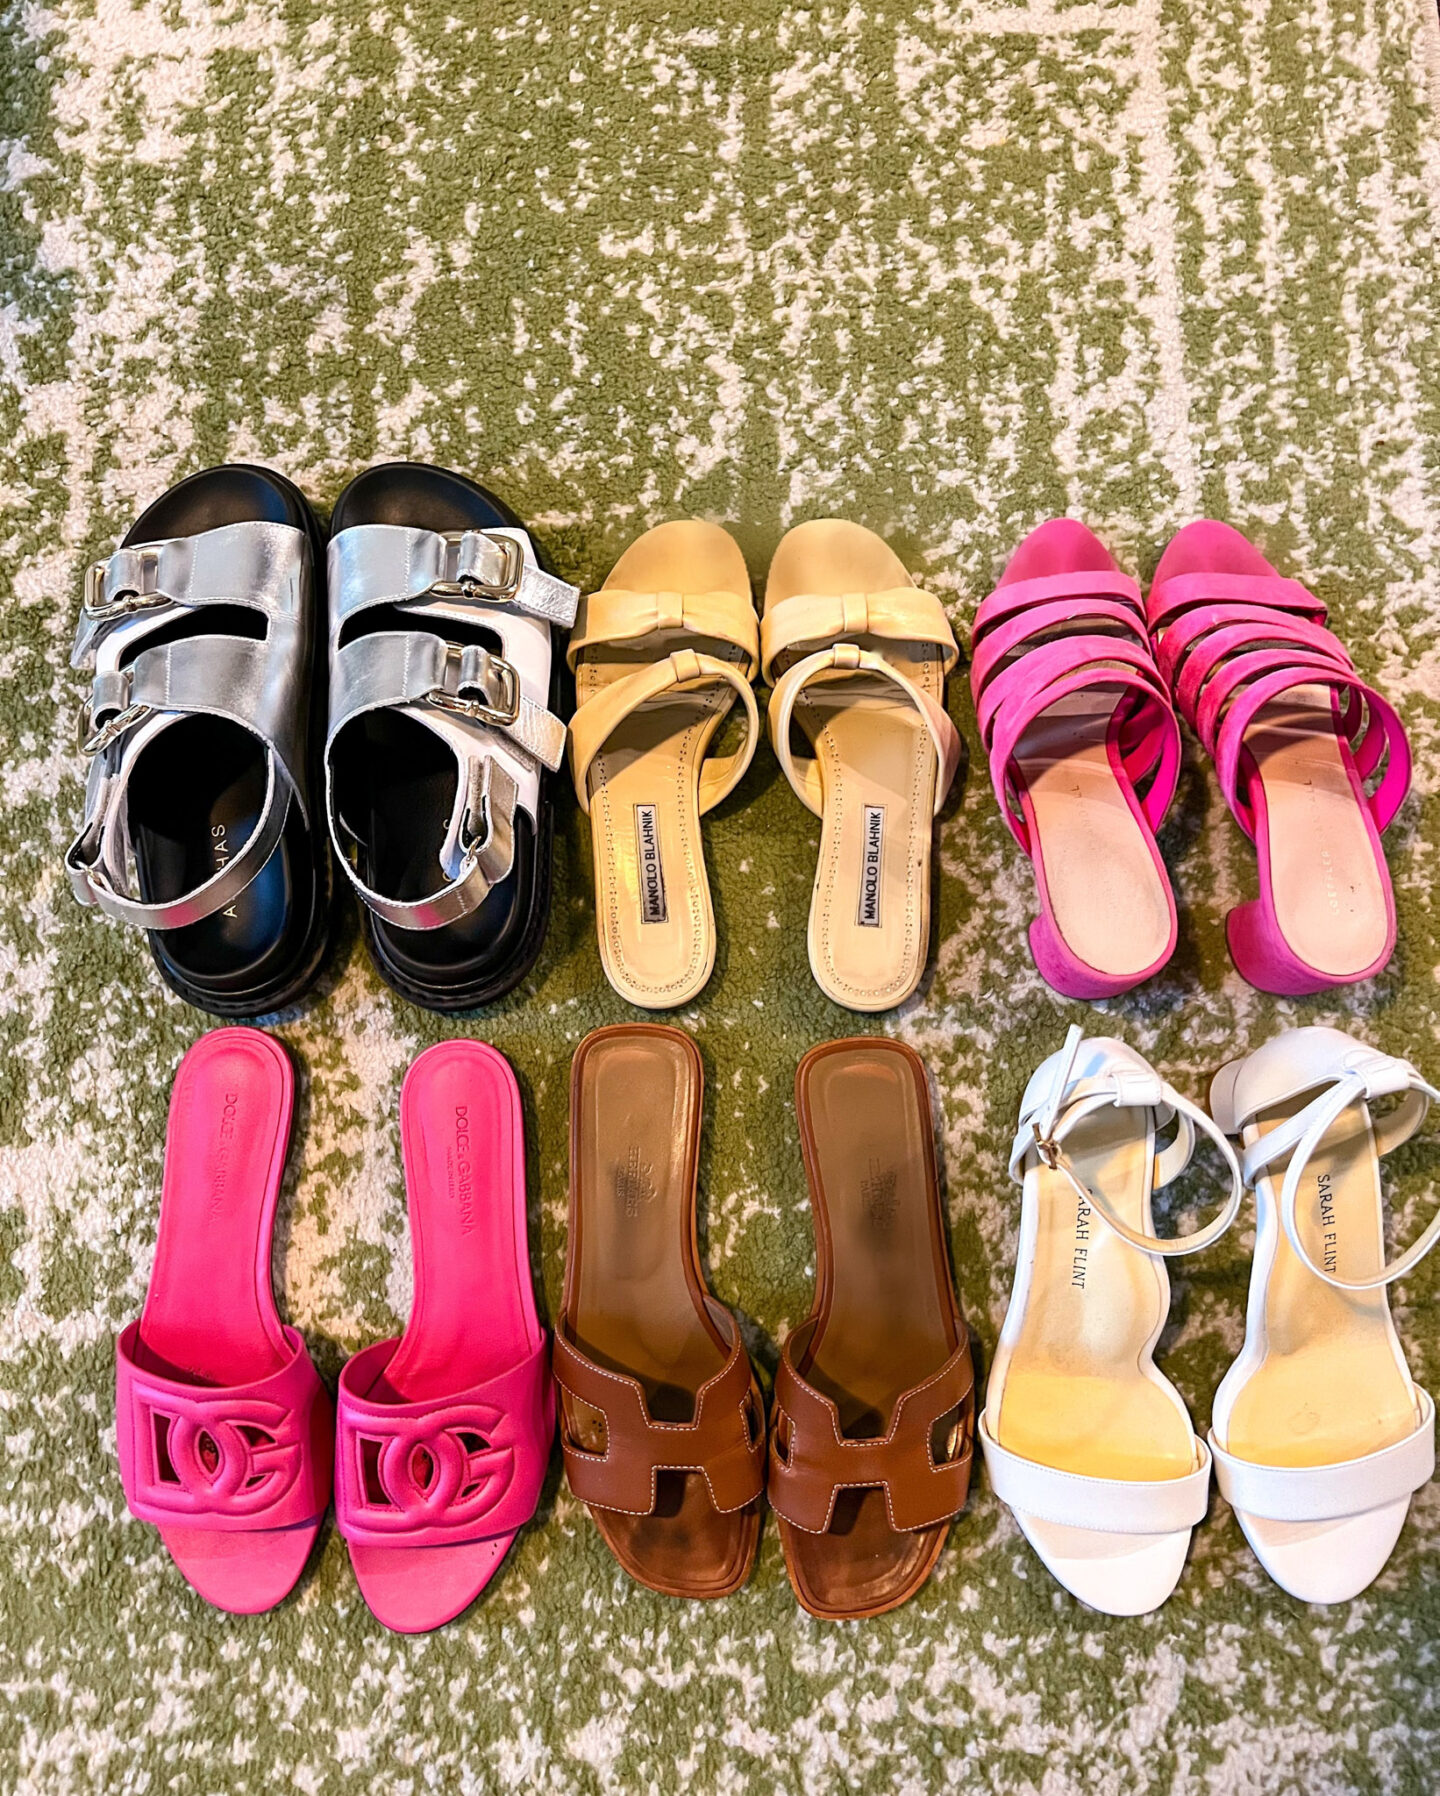 Dallas fashion blogger shares summer shoes worth styling